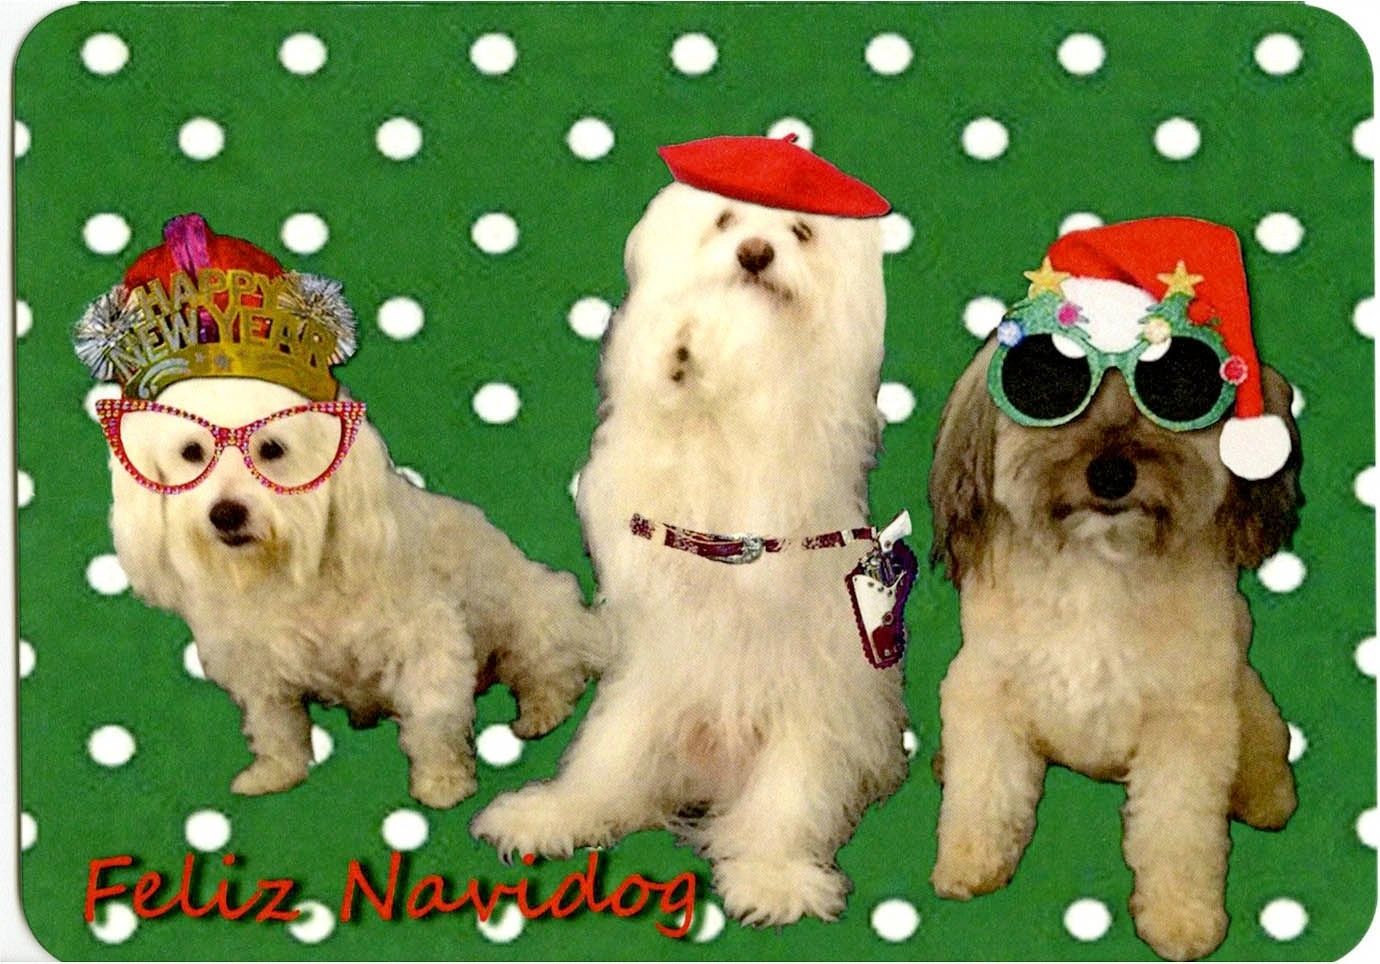 Three dogs wearing hats and glasses on a green background